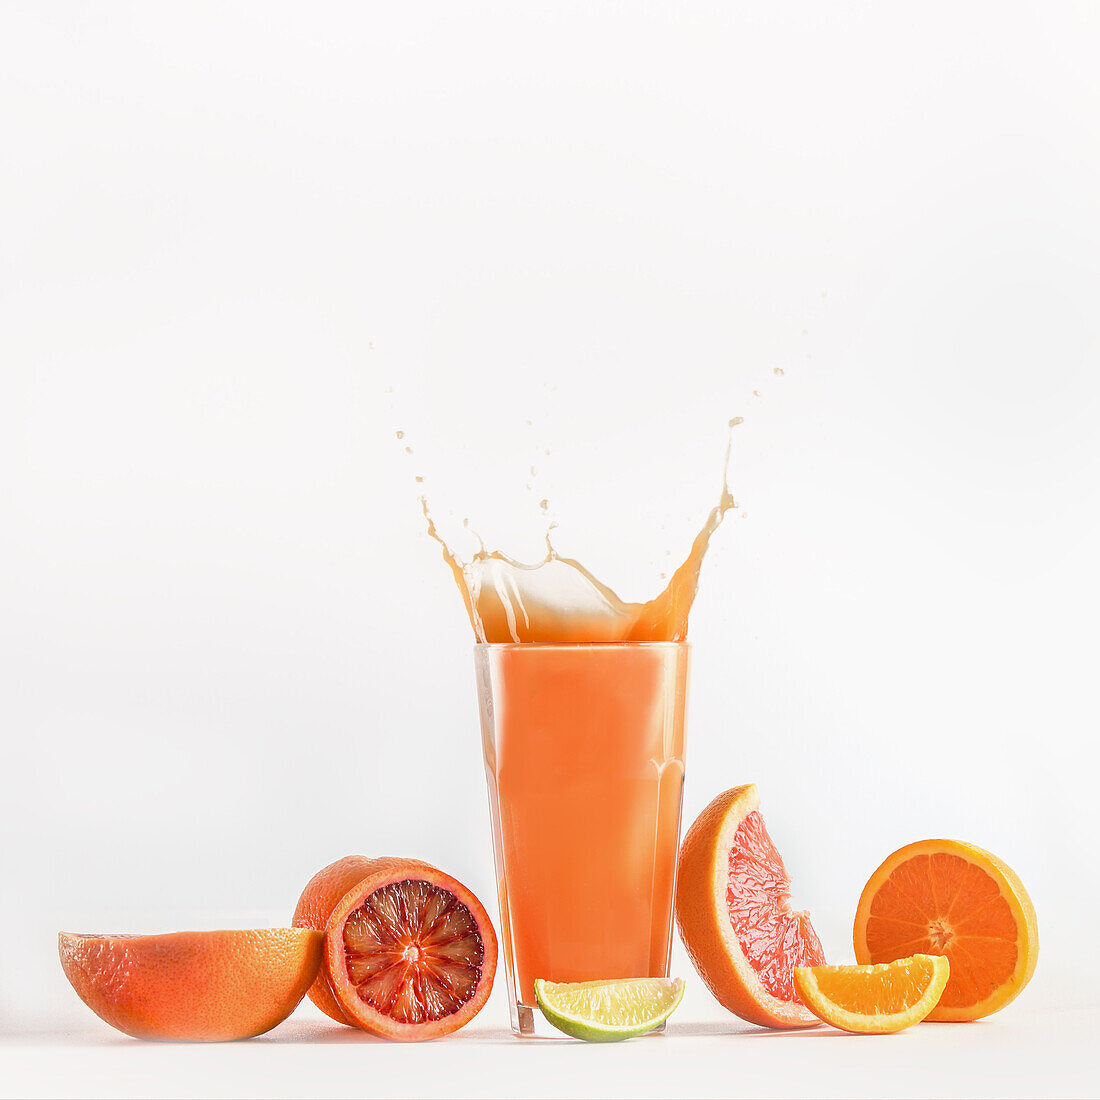 Splashing of citrus juice in glass with blood orange, grapefruit and lime at white background. Refreshing healthy drink with vitamins. Liquid in motion. Front view.